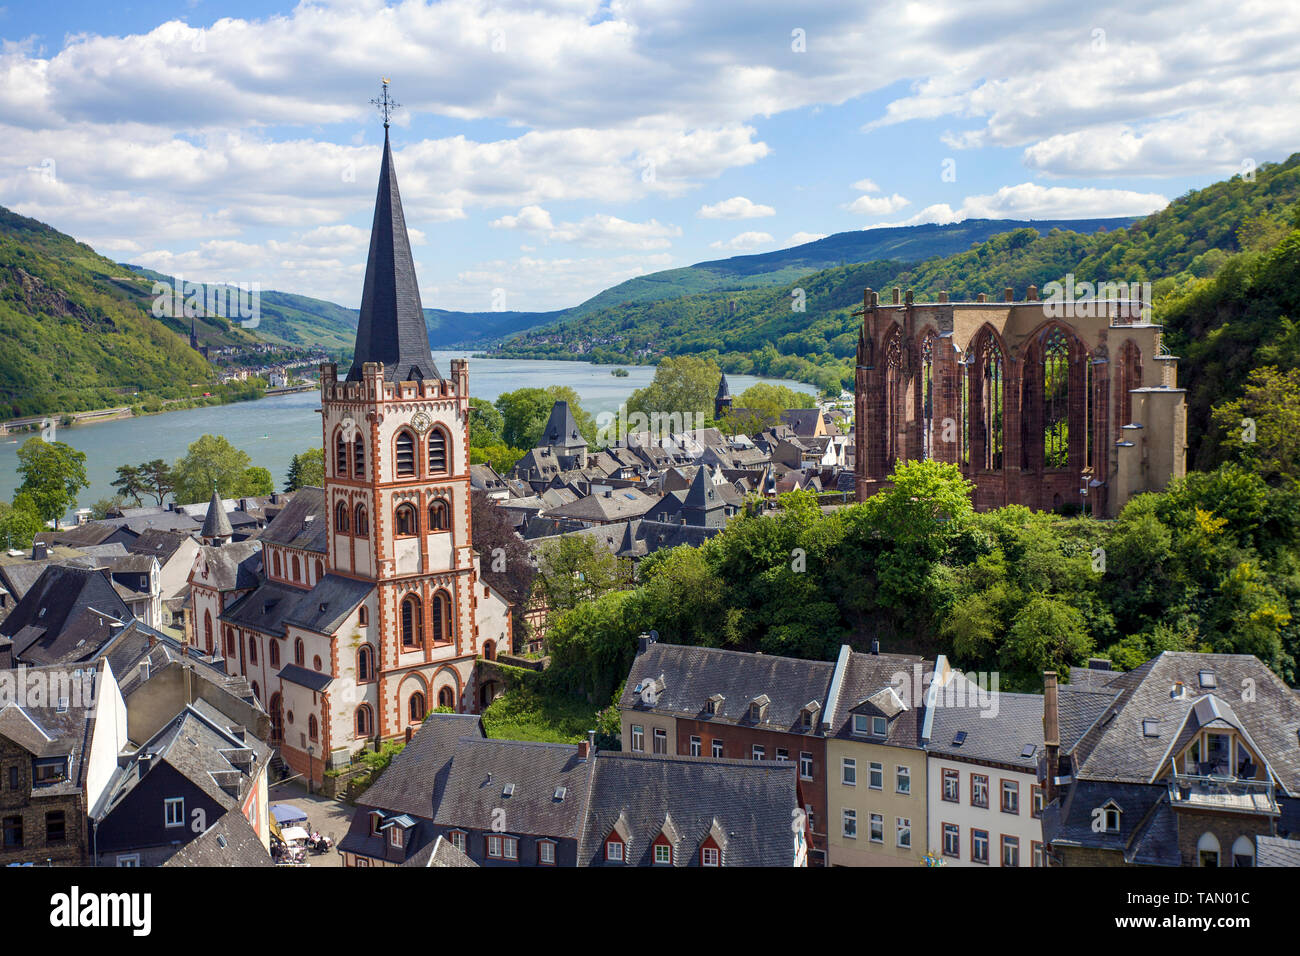 View from tower 'Postenturm' on Bacharach with Saint Peter church and Werner chapel, Upper Middle Rhine Valley, Rhineland-Palatinate, Germany Stock Photo